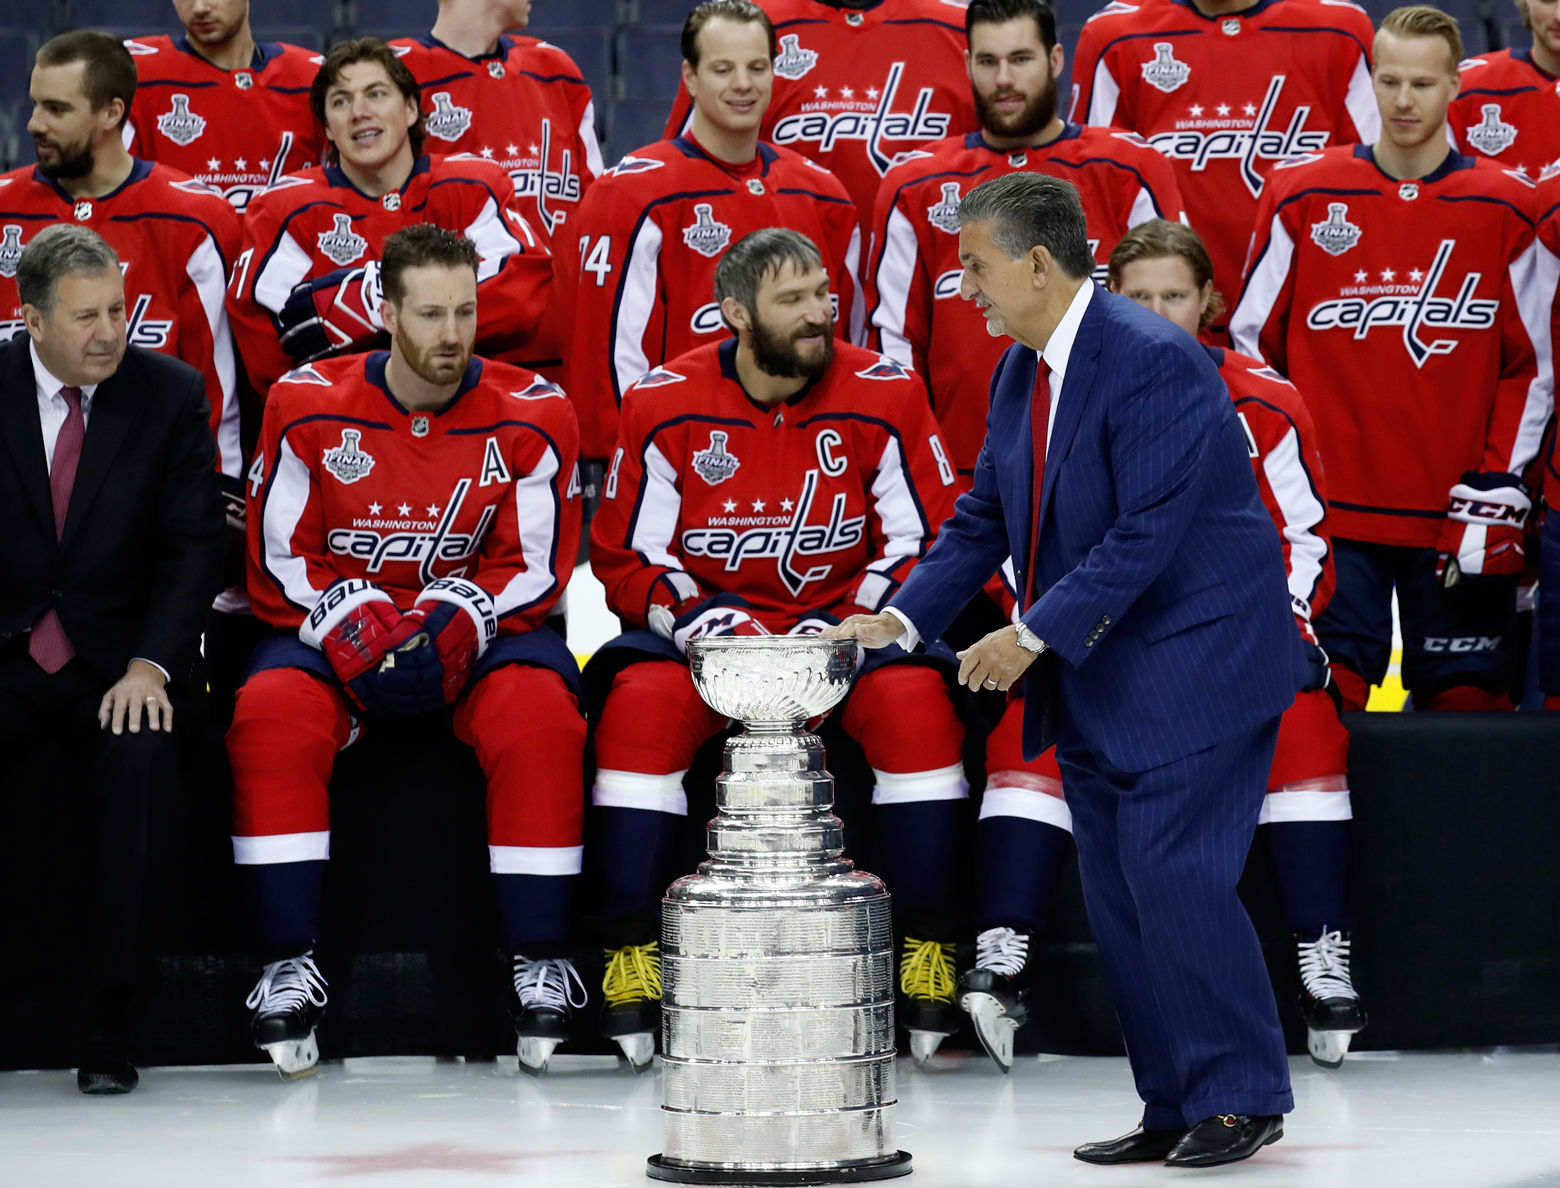 Ted Leonsis touches the Stanley Cup during the team picture with the Stanley Cup on the ice at Capital One Arena, Tuesday, June 12, 2018, in Washington. (AP Photo/Alex Brandon)